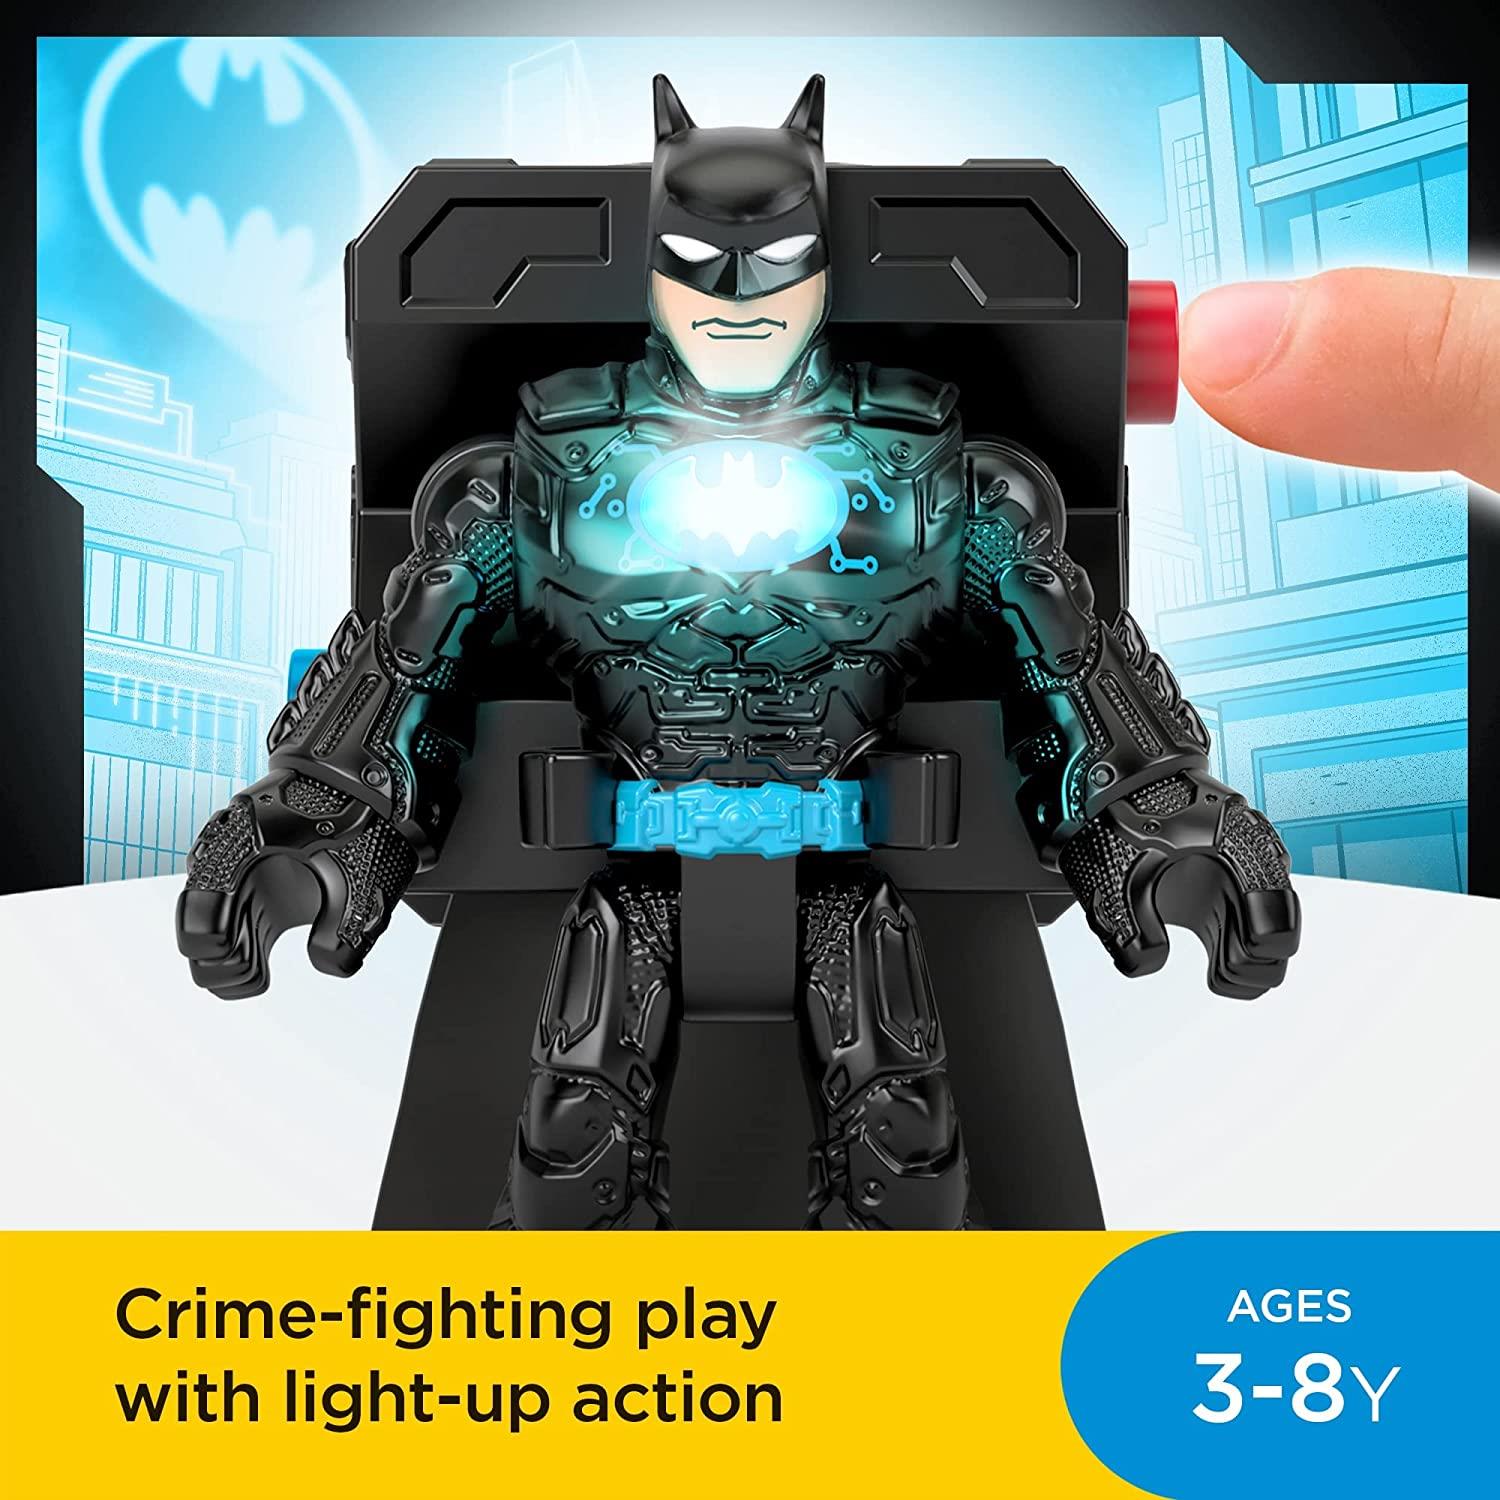 DC Playset with Supreheroes and Supervillains Batman World by Fisher Price Imaginext - UKBuyZone